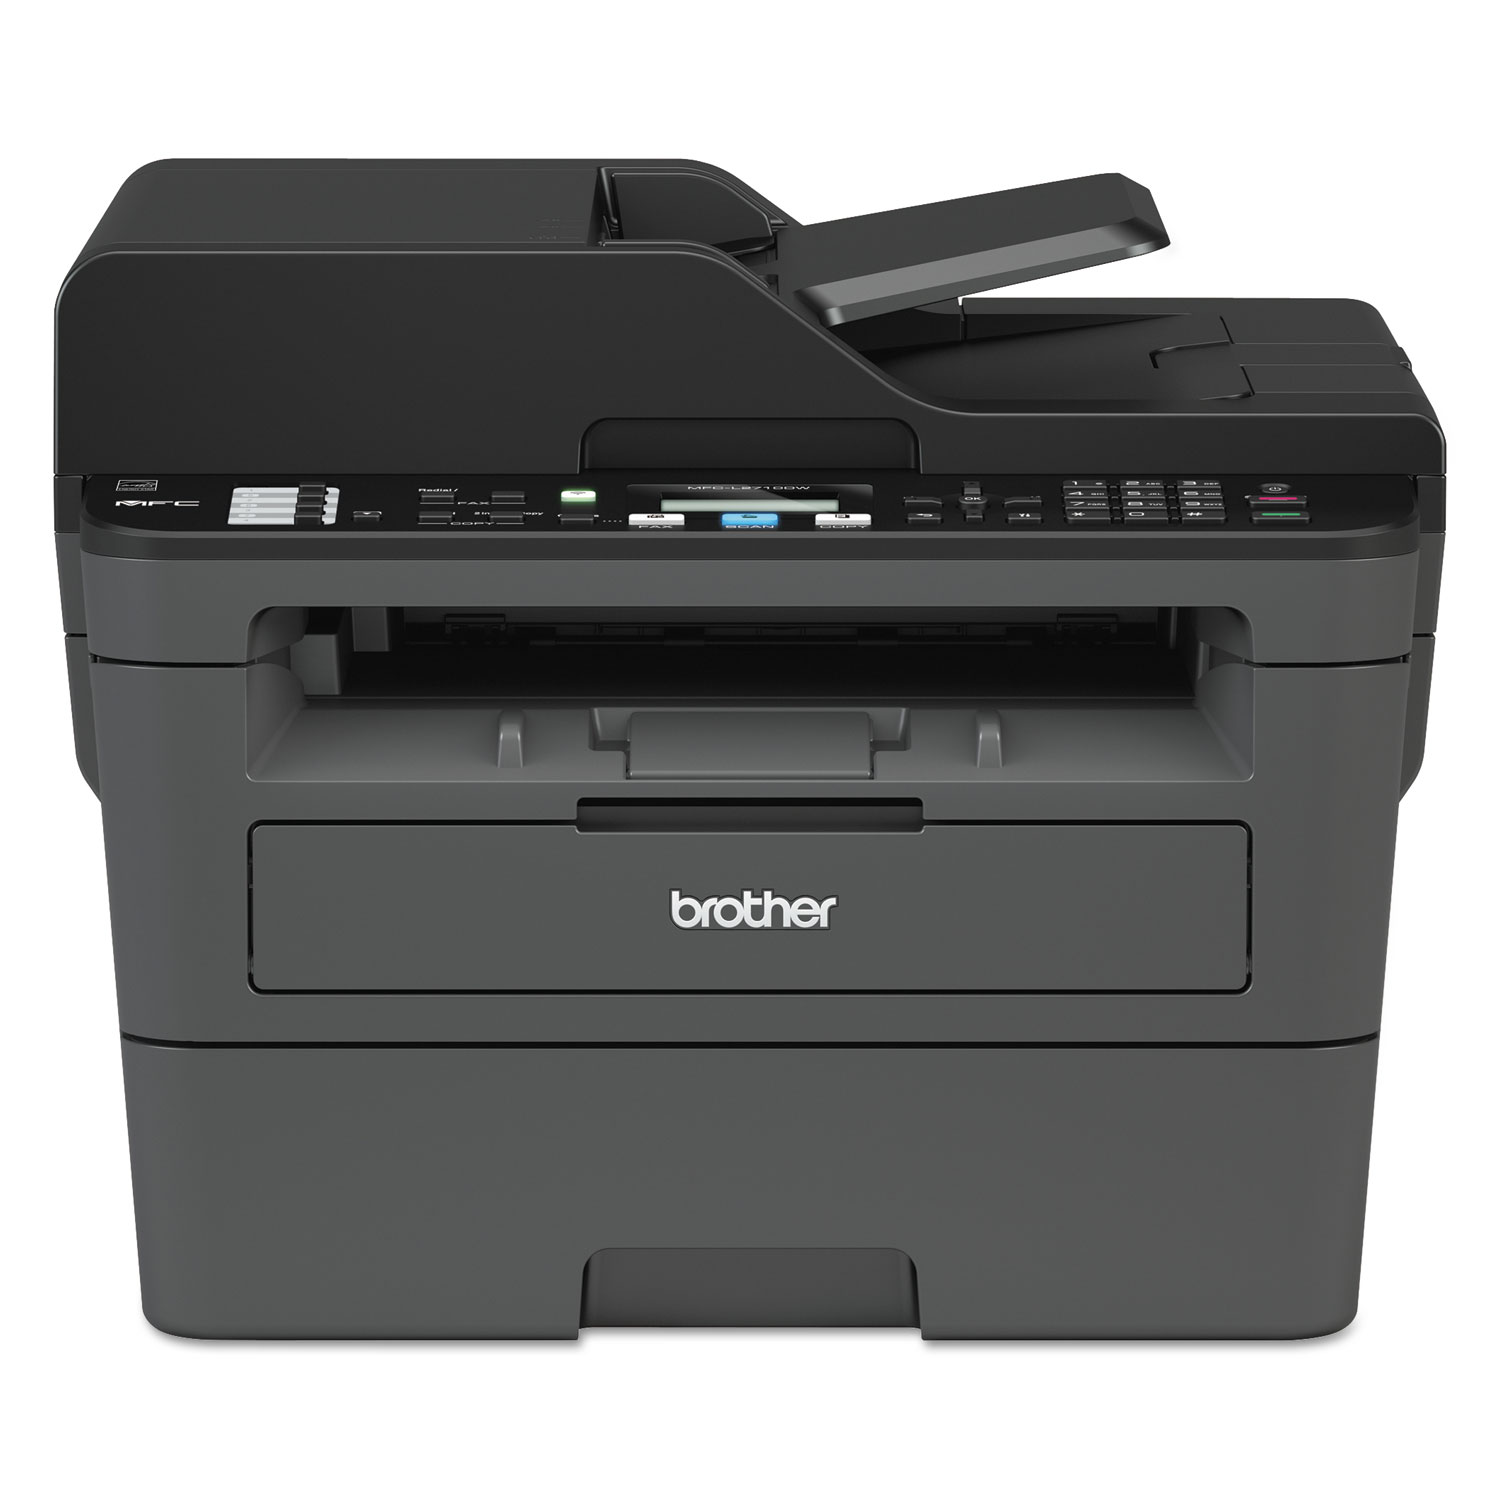  Brother MFCL2710DW MFCL2710DW Monochrome Compact Laser All-in-One Printer with Duplex Printing and Wireless Networking (BRTMFCL2710DW) 